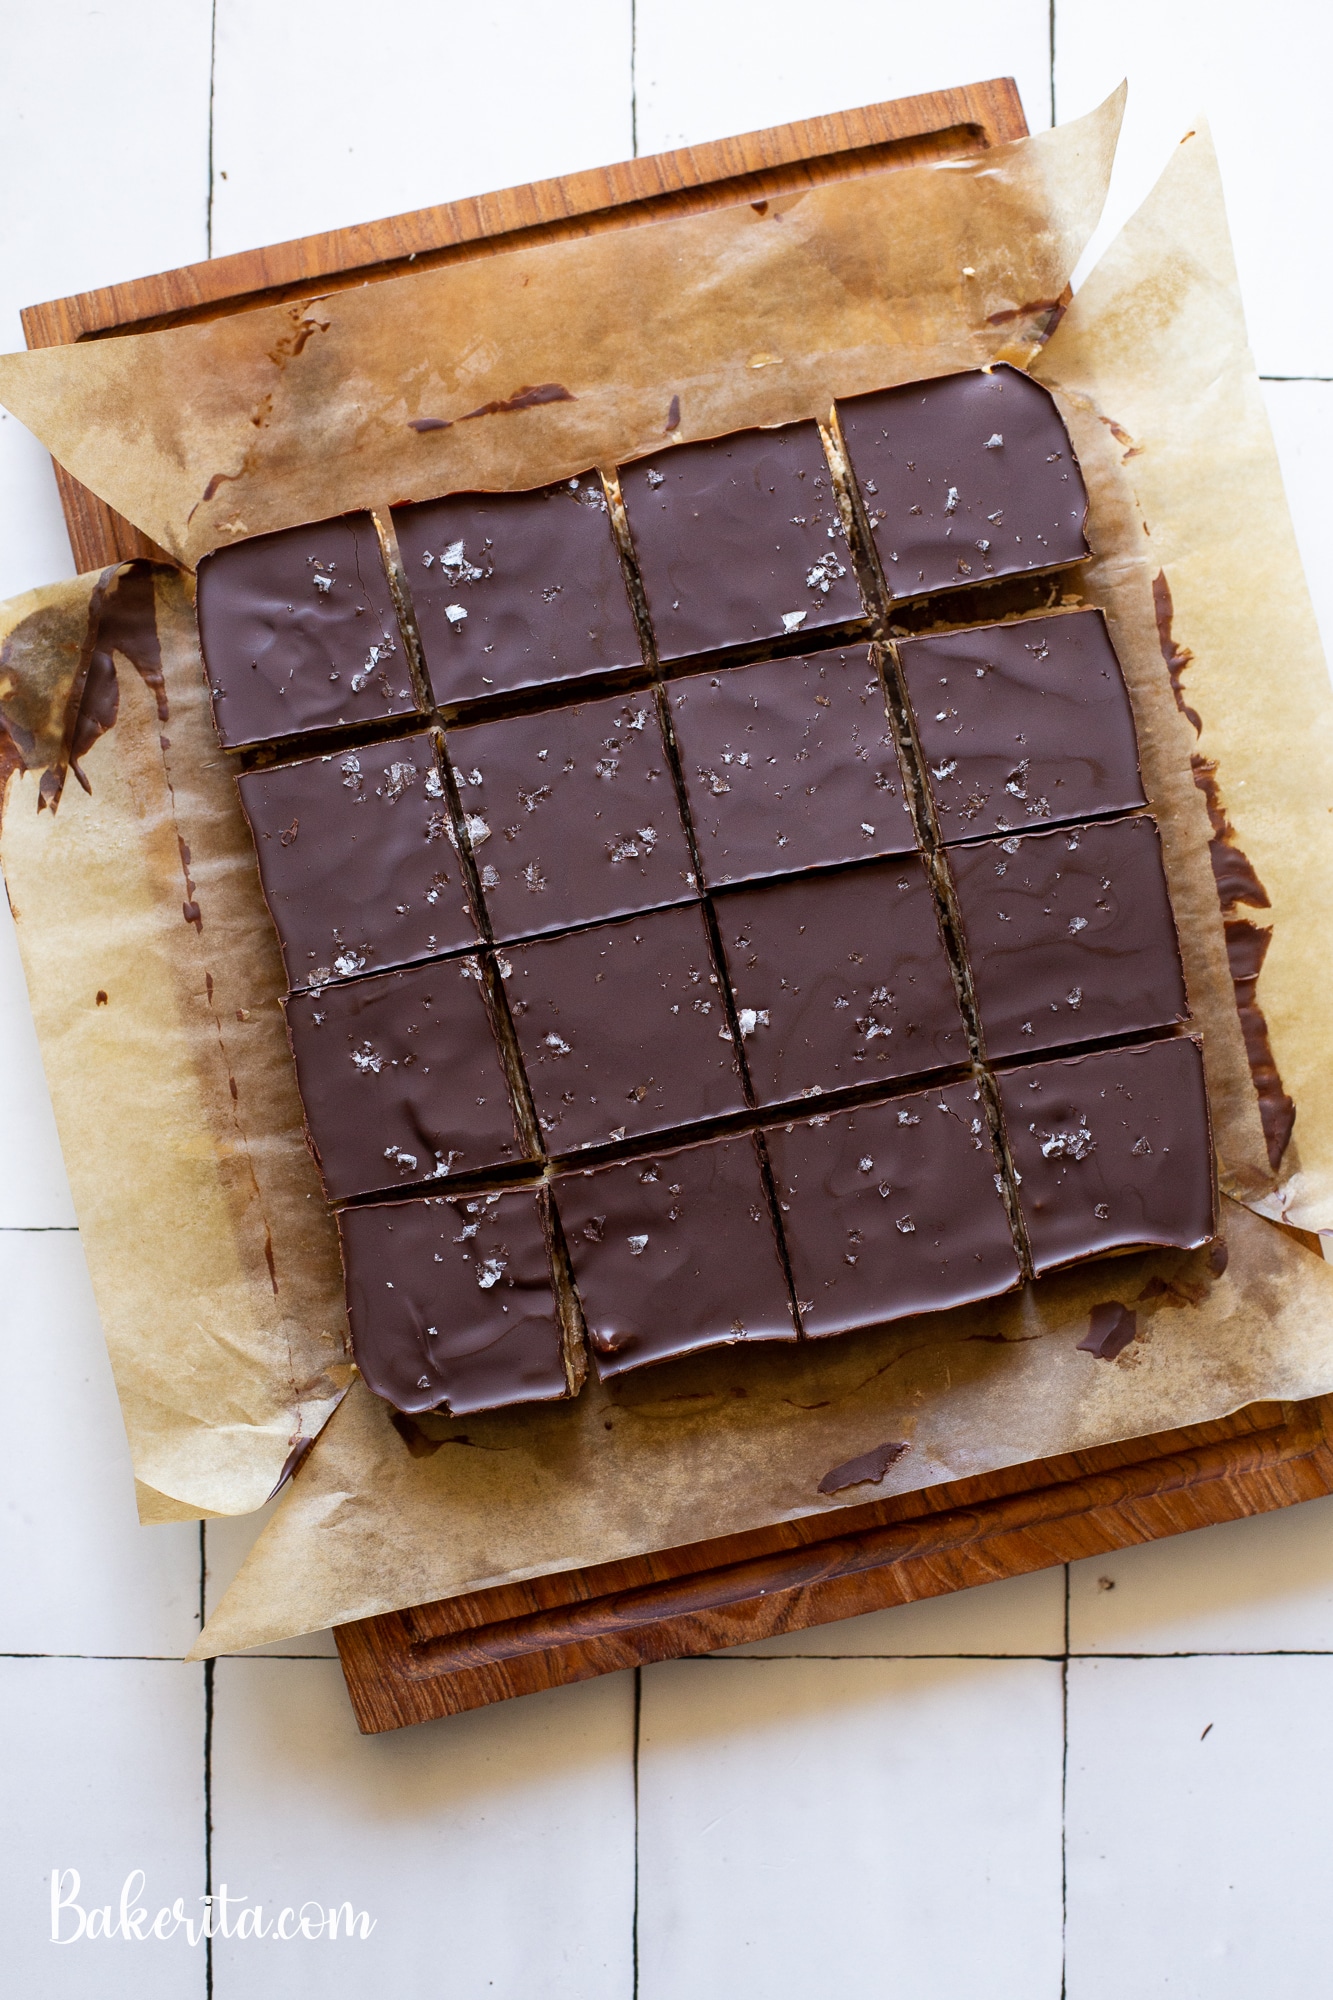 Calling all peanut butter lovers! These Gluten-Free Vegan Peanut Butter Millionaire's Shortbread will knock your socks off. They have a layer of coconut flour shortbread, a quick no-cook peanut butter caramel, and a layer of dark chocolate.